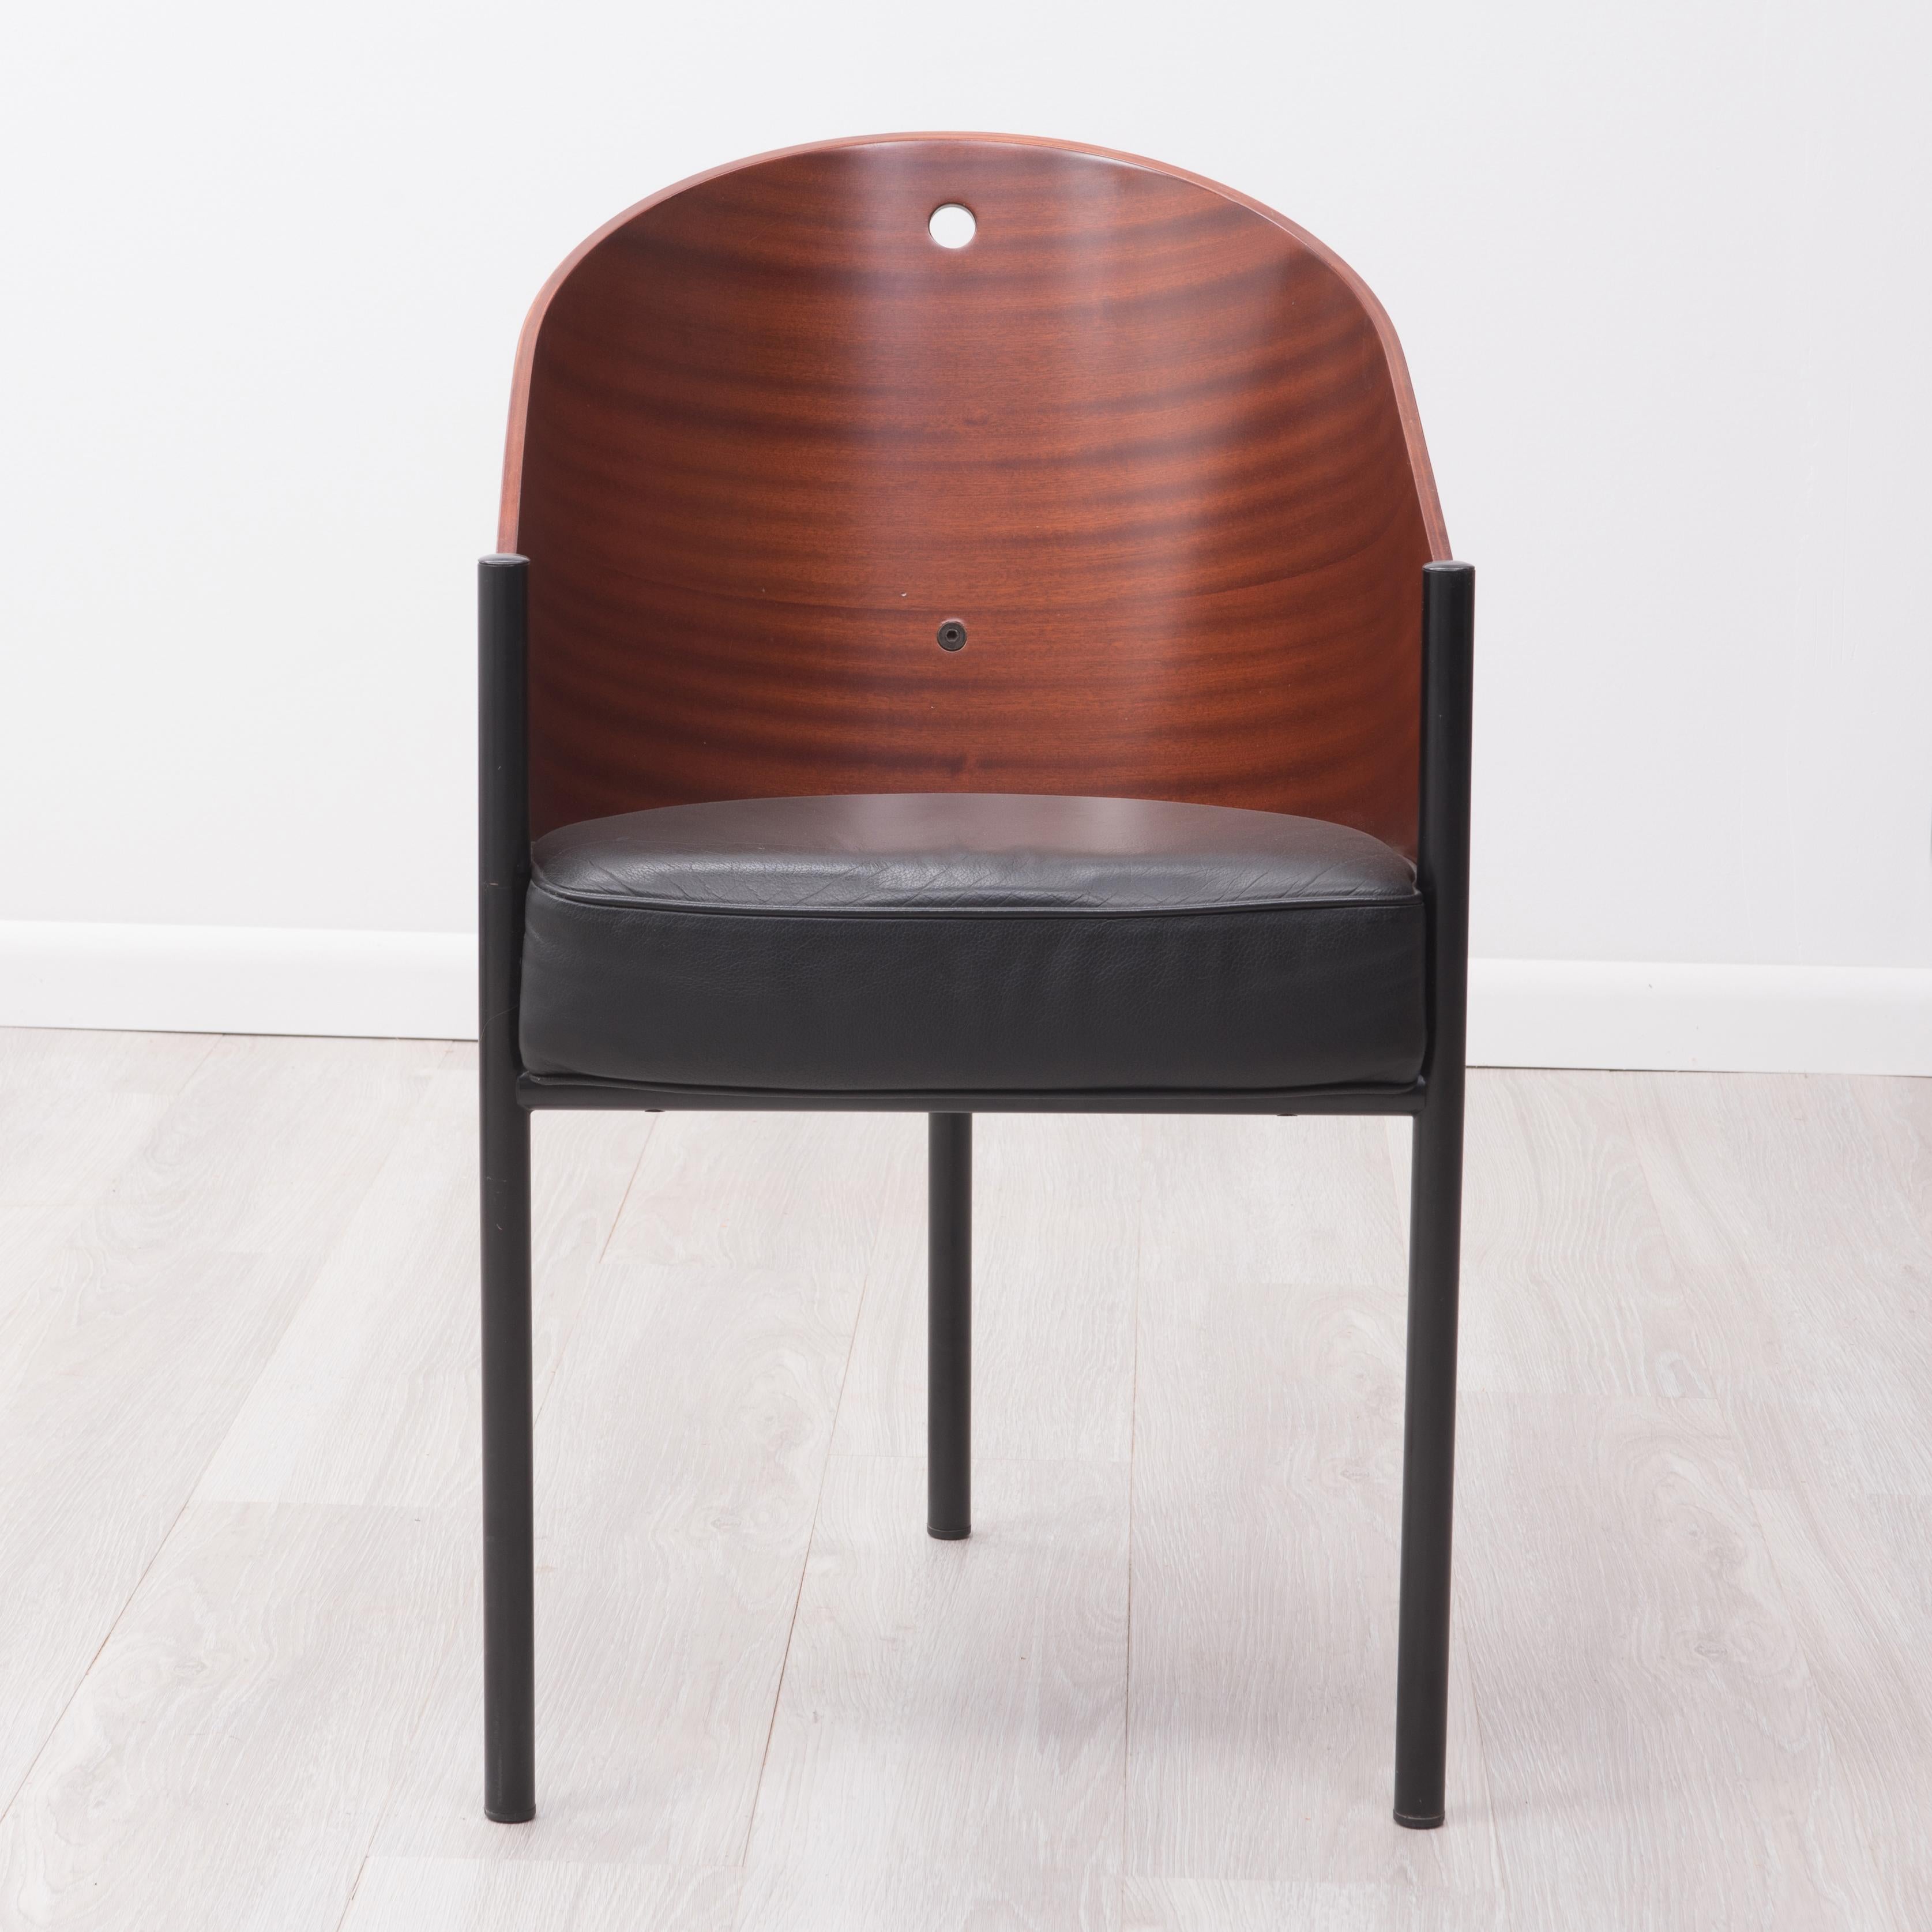 A Costes armchair designed by Philippe Starck for Driade circa 1982 for the Costes Café in Paris. Wood shell with excellent grain, three legs and a leather seat.